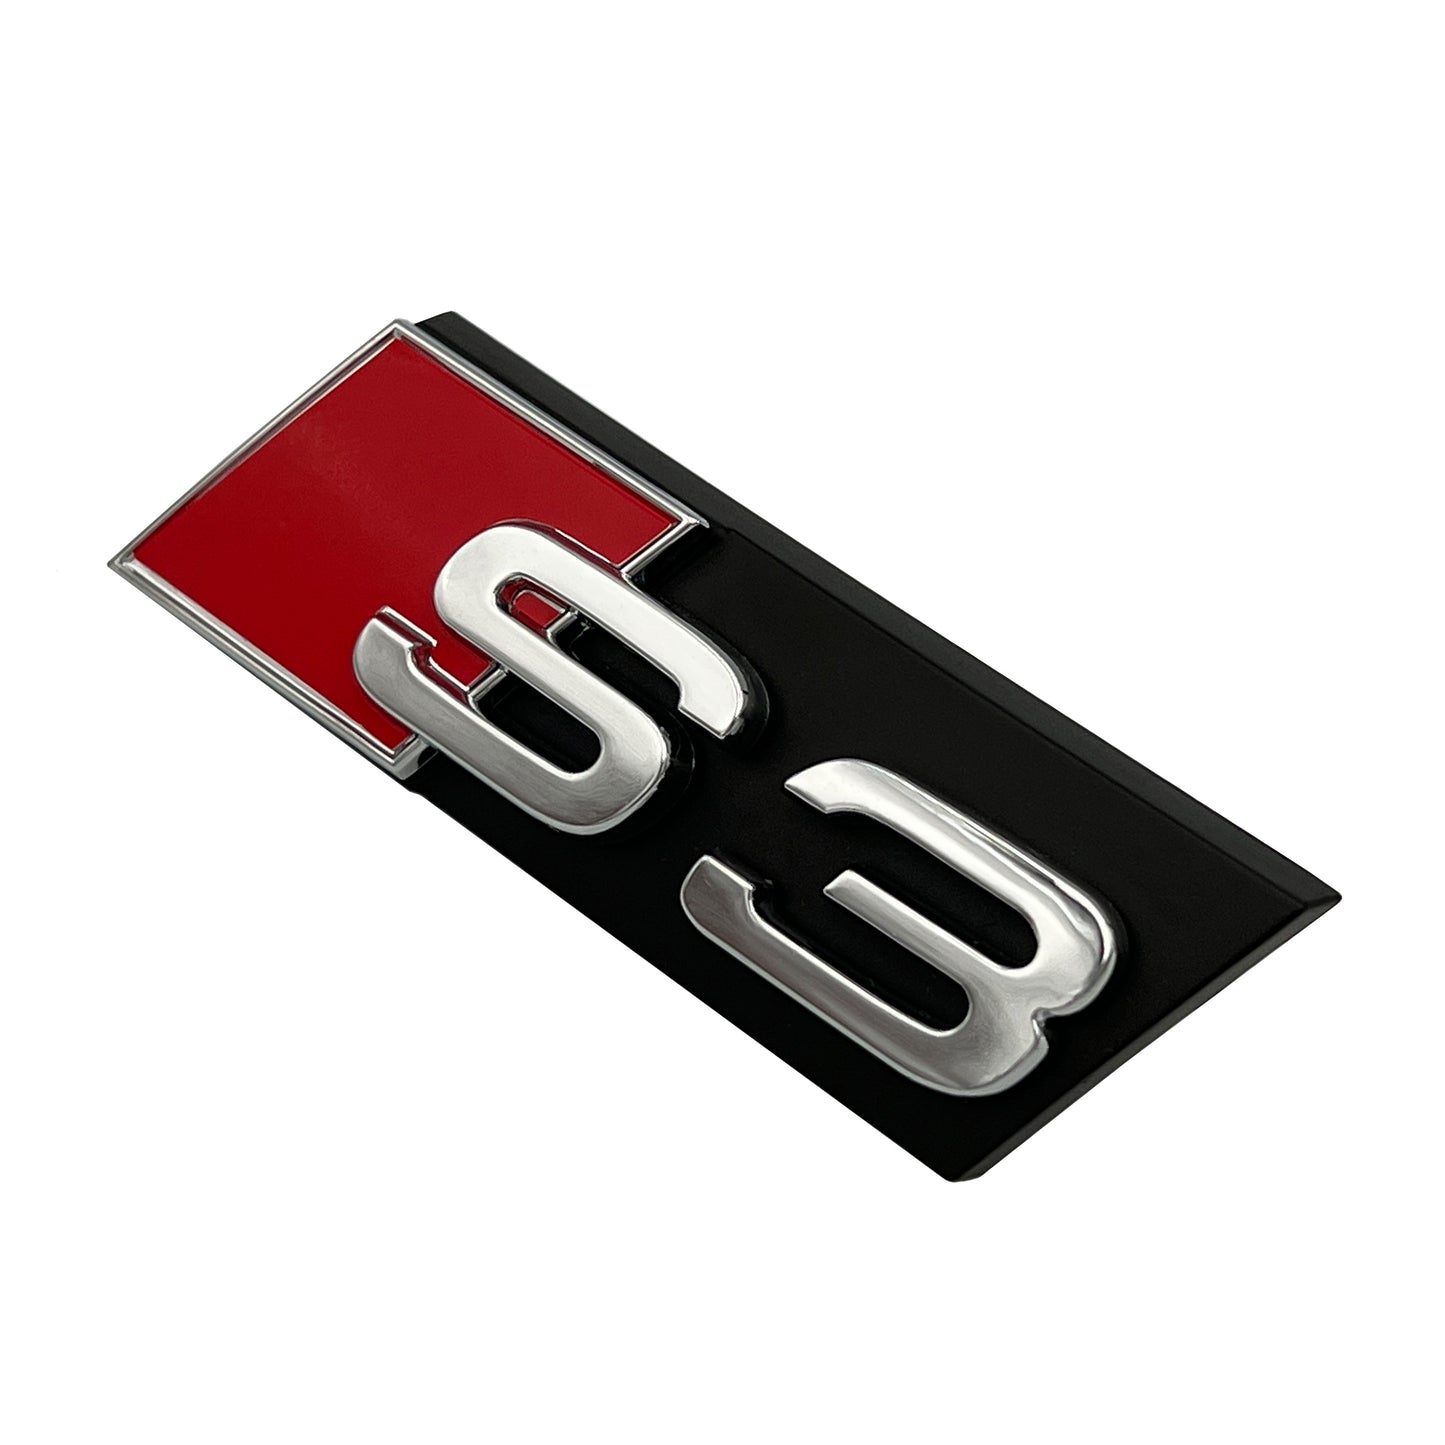 Audi S3 Front Grill Emblem Chrome fit A3 S3 Hood Grille Badge Nameplate